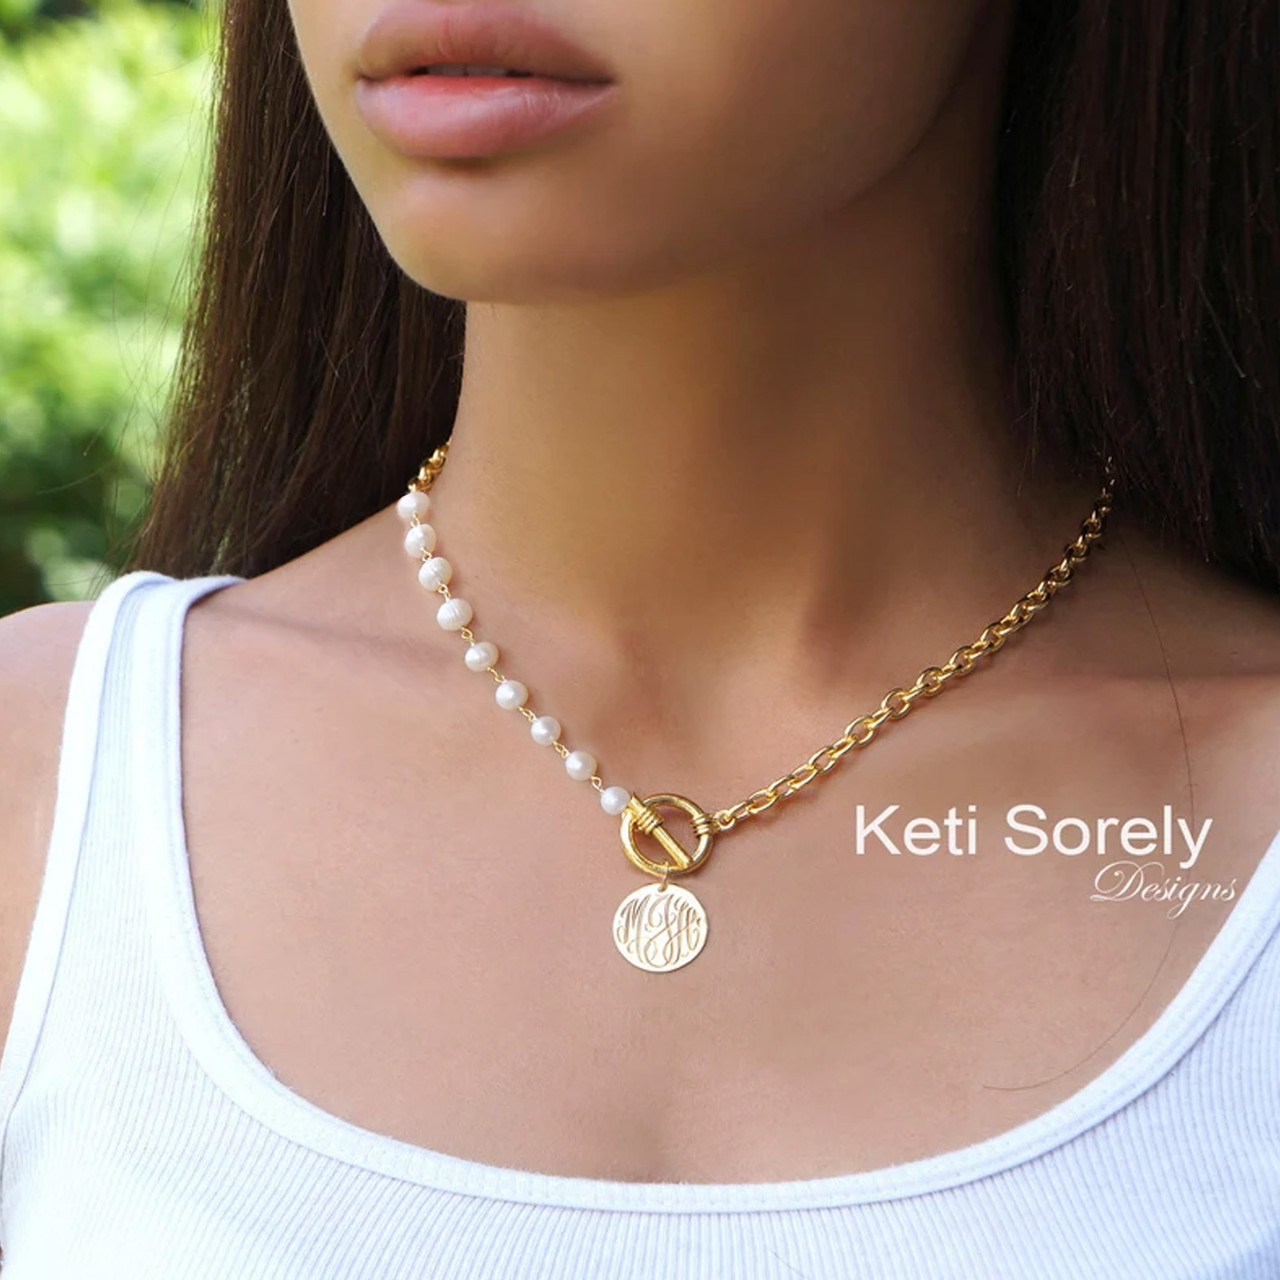 Natural pearls necklace combo with large link chain, toggle clasp